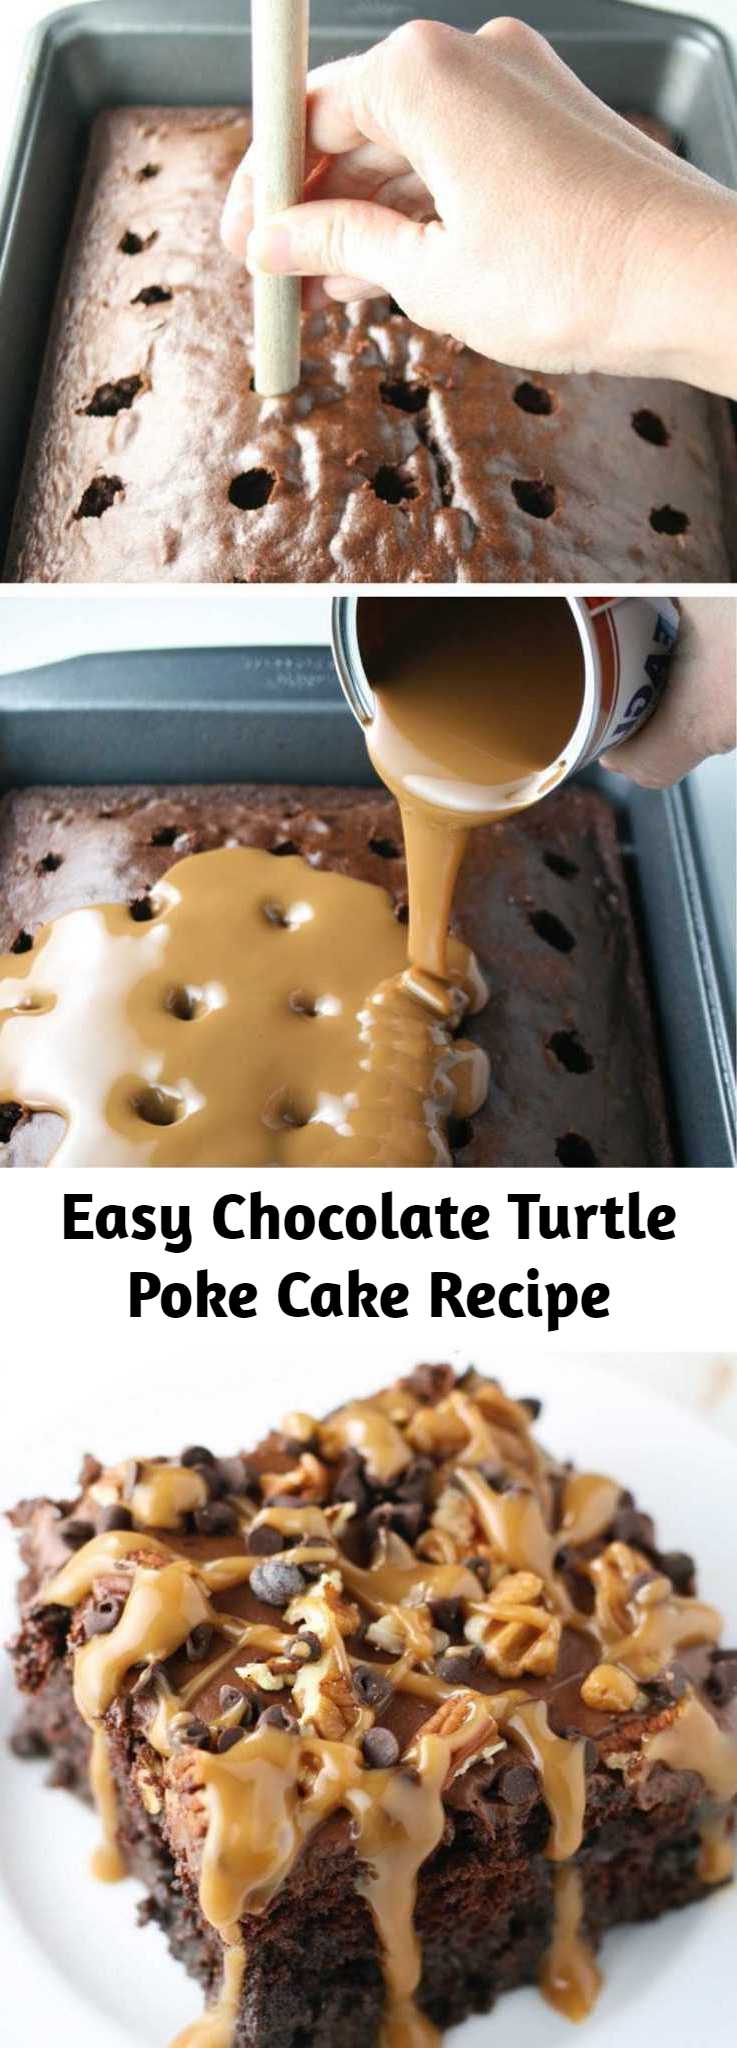 Easy Chocolate Turtle Poke Cake Recipe - Chocolate Turtle Poke Cake is a moist chocolate cake with holes poked in, then covered with caramel sauce, chocolate frosting, pecans, chocolate chips and more caramel sauce. If you're a chocolate turtle candy fan, this is the cake for you! It's so delicious! And quick, easy to make too!